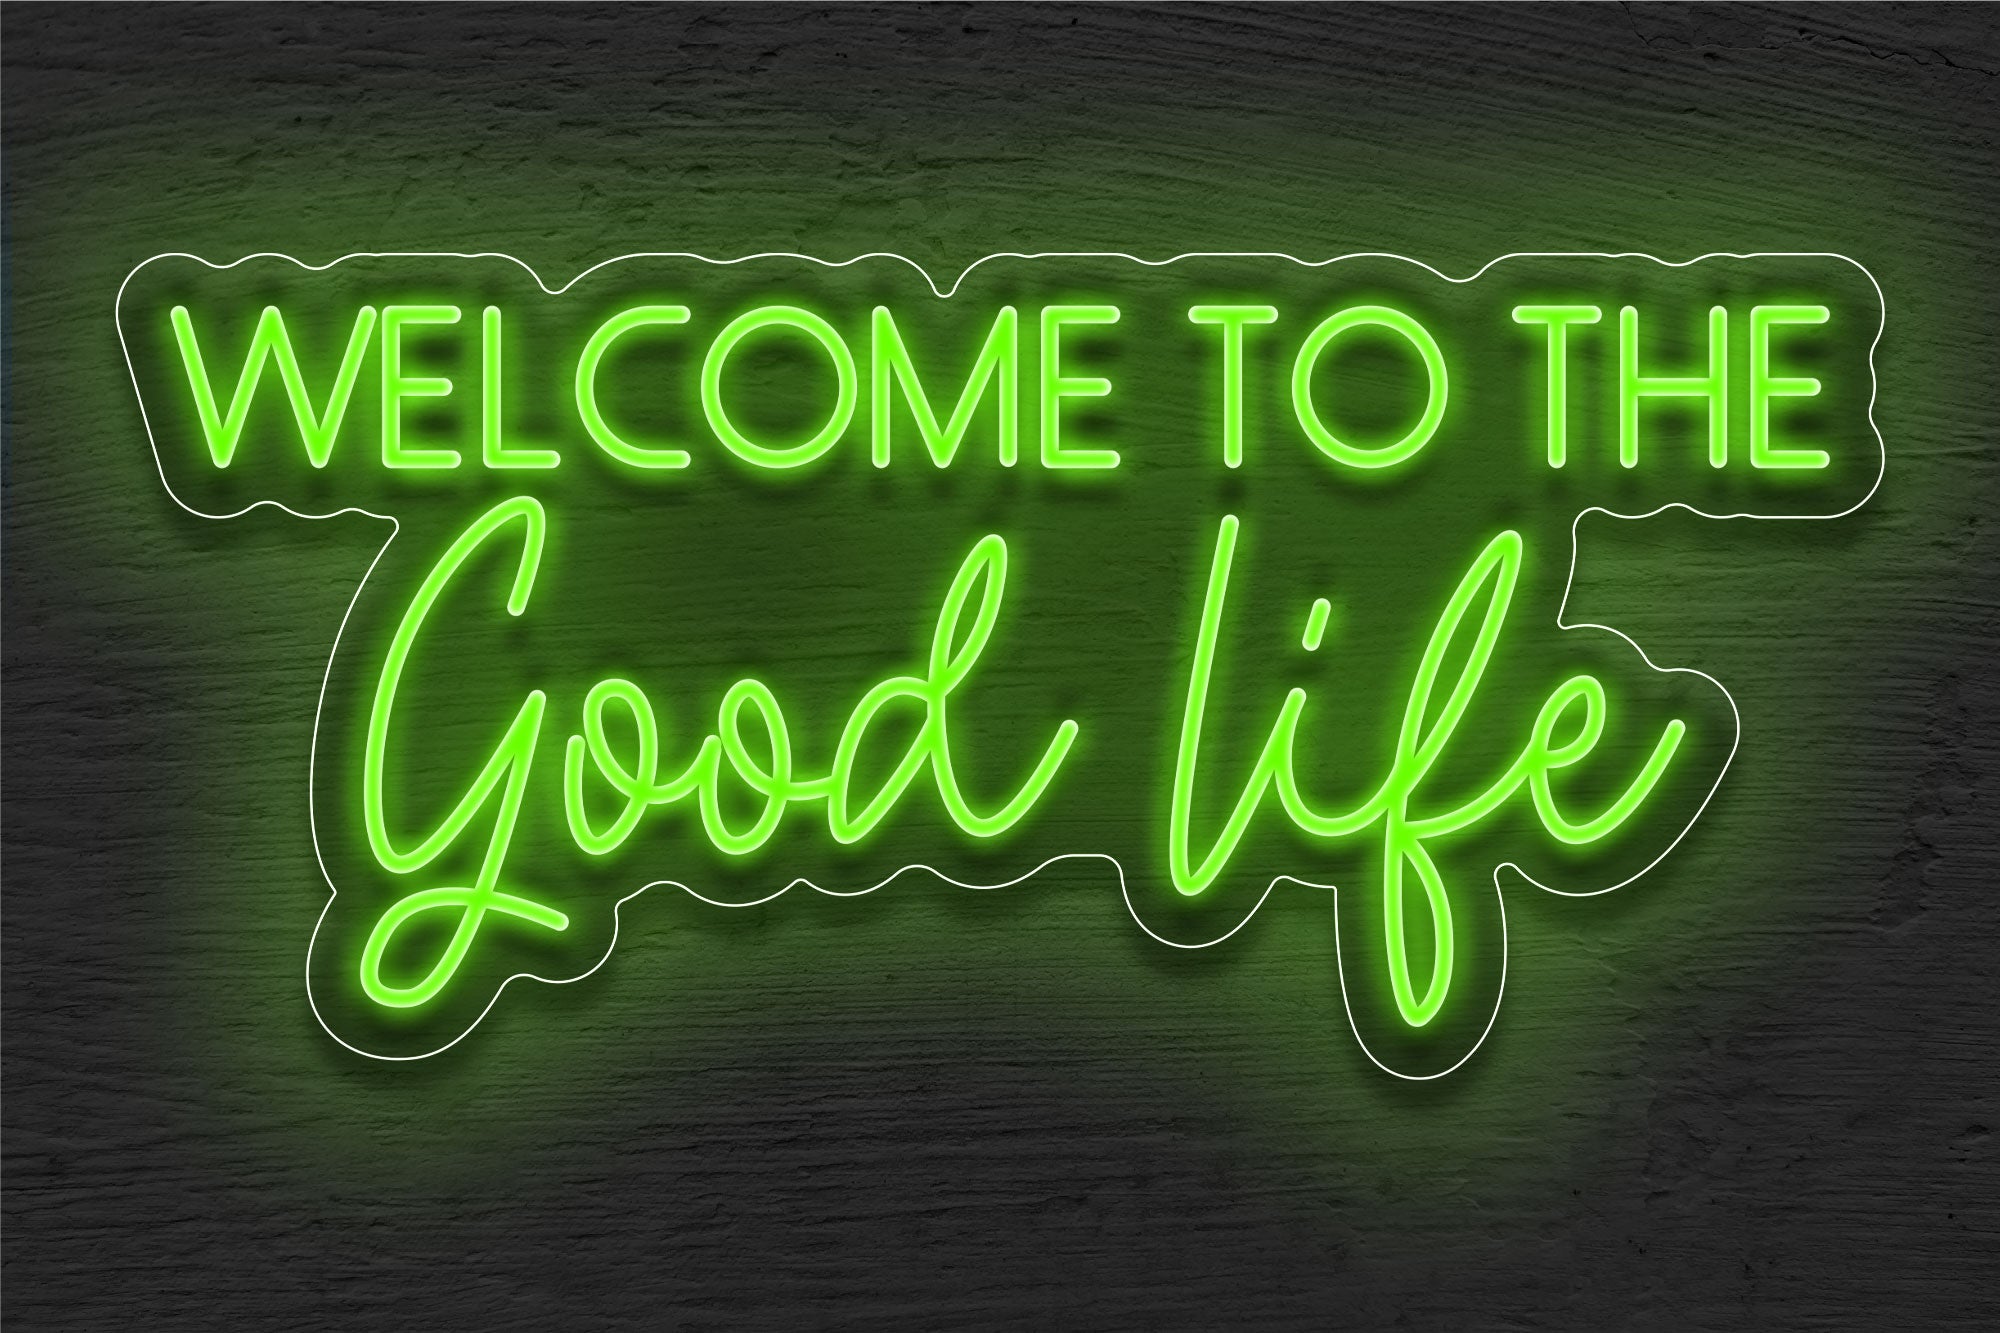 "Welcome To The Good Life" LED Neon Sign